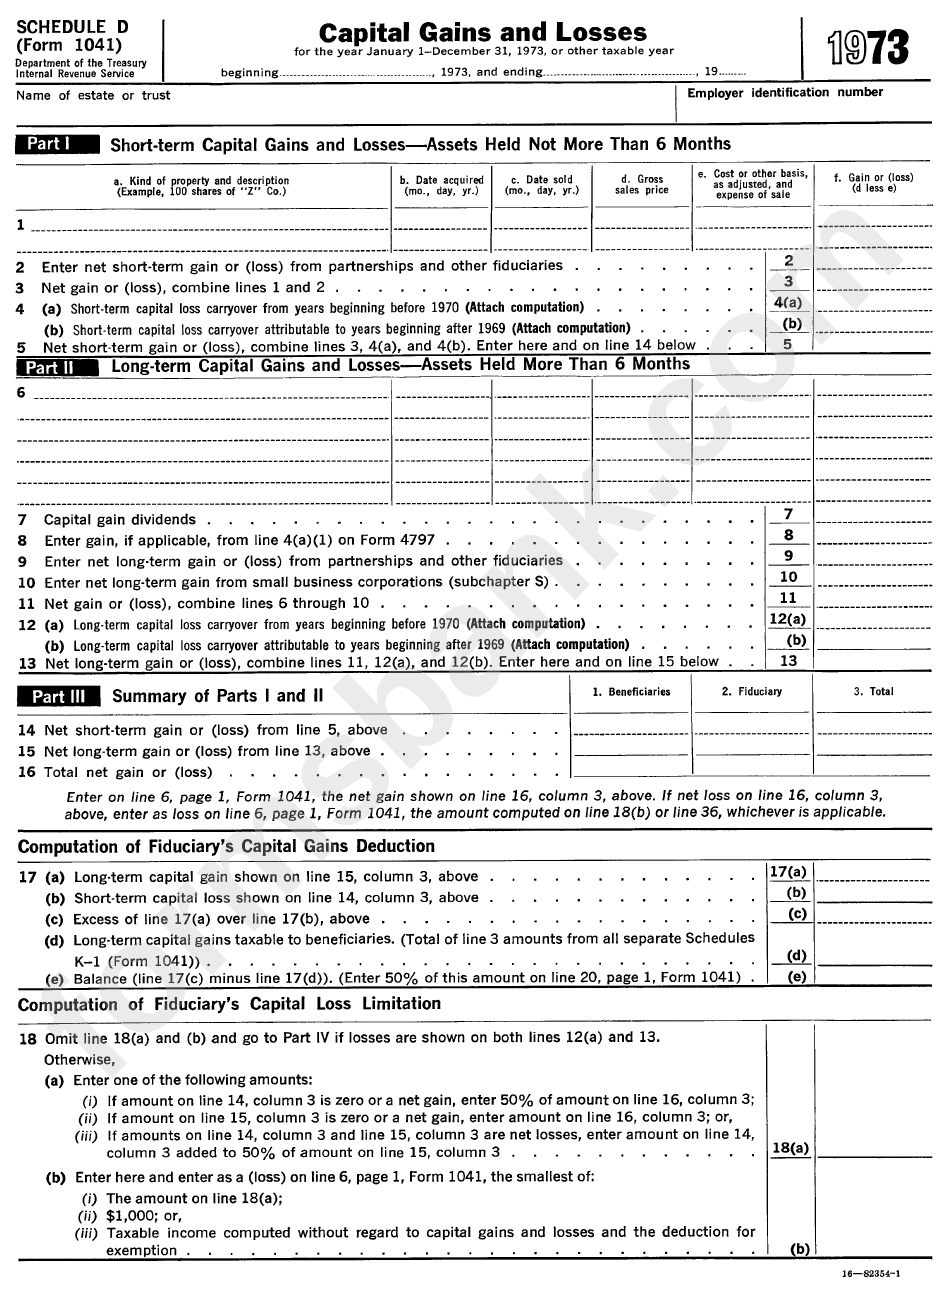 printable-schedule-d-tax-form-printable-forms-free-online